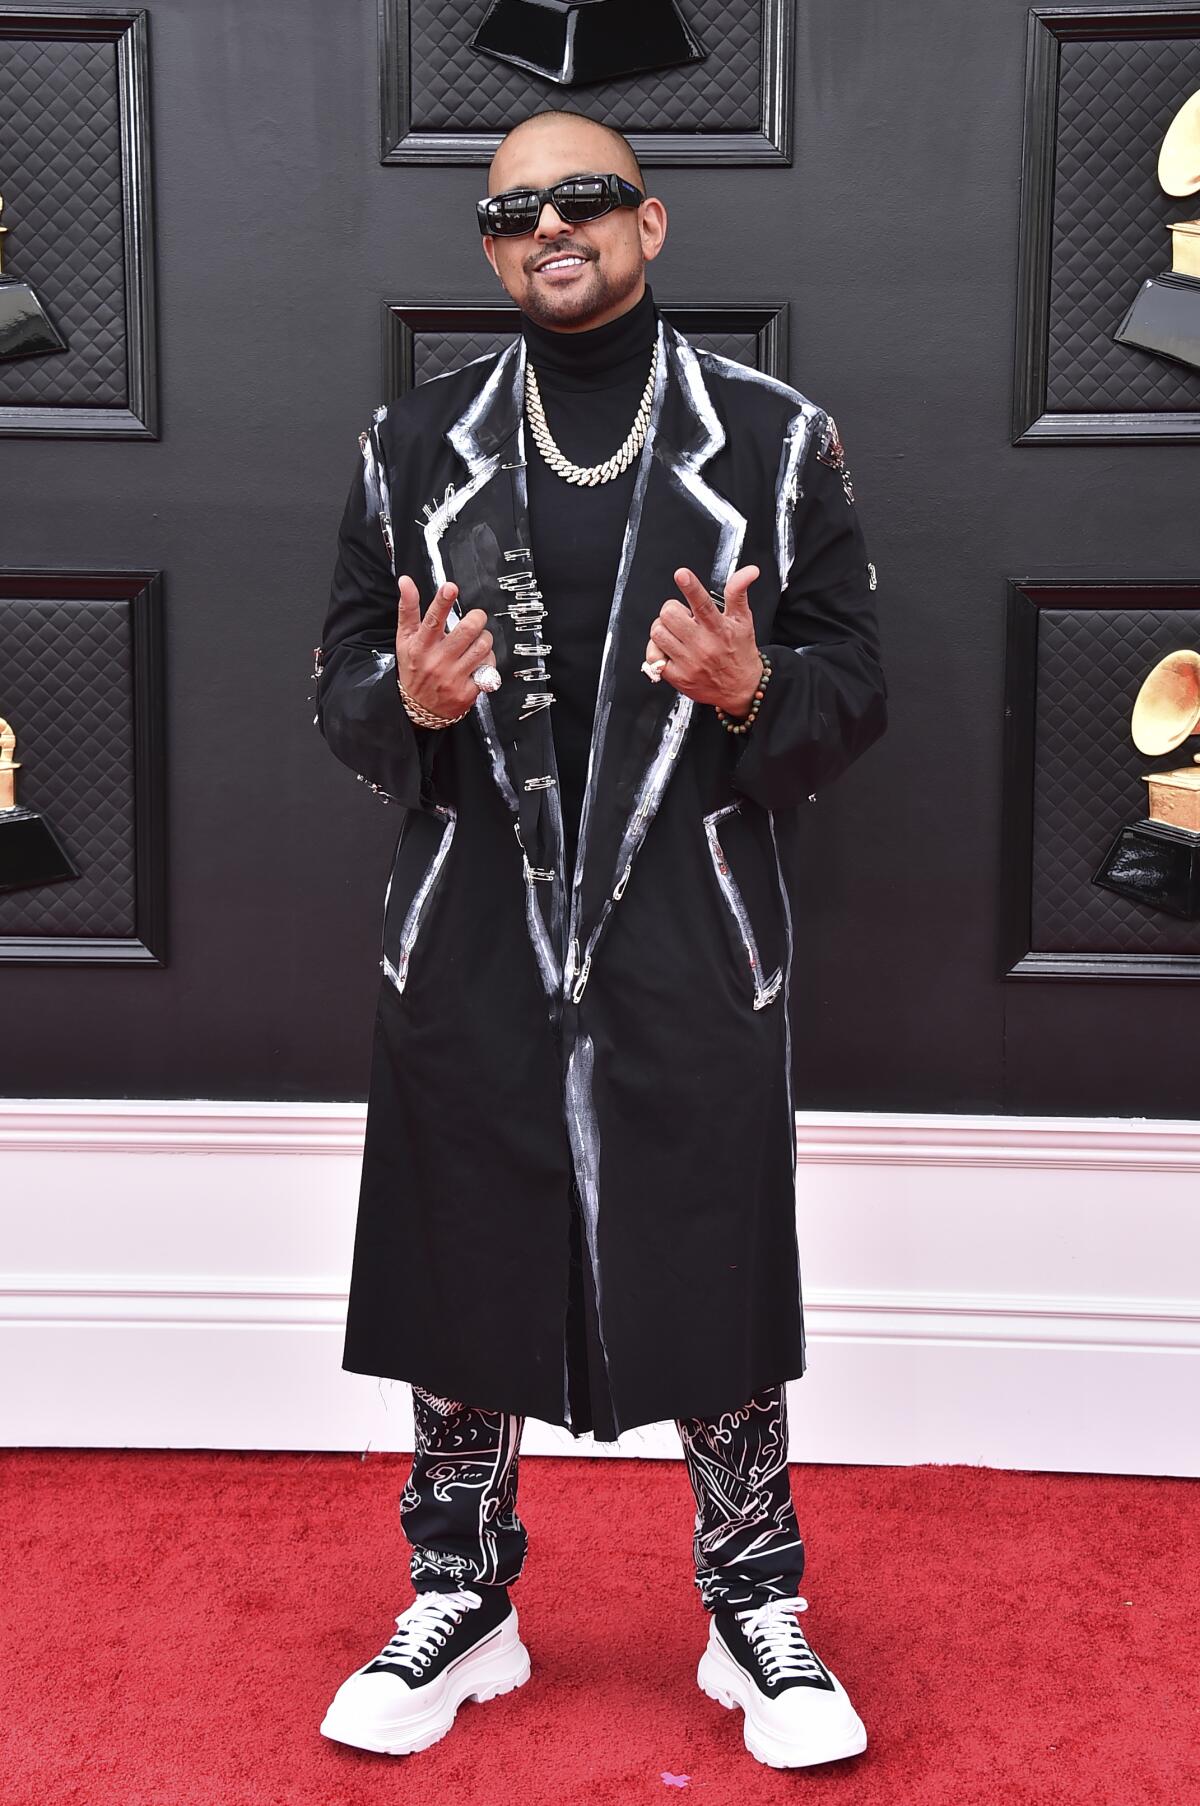 Sean Paul arrives at the 64th Grammy Awards.